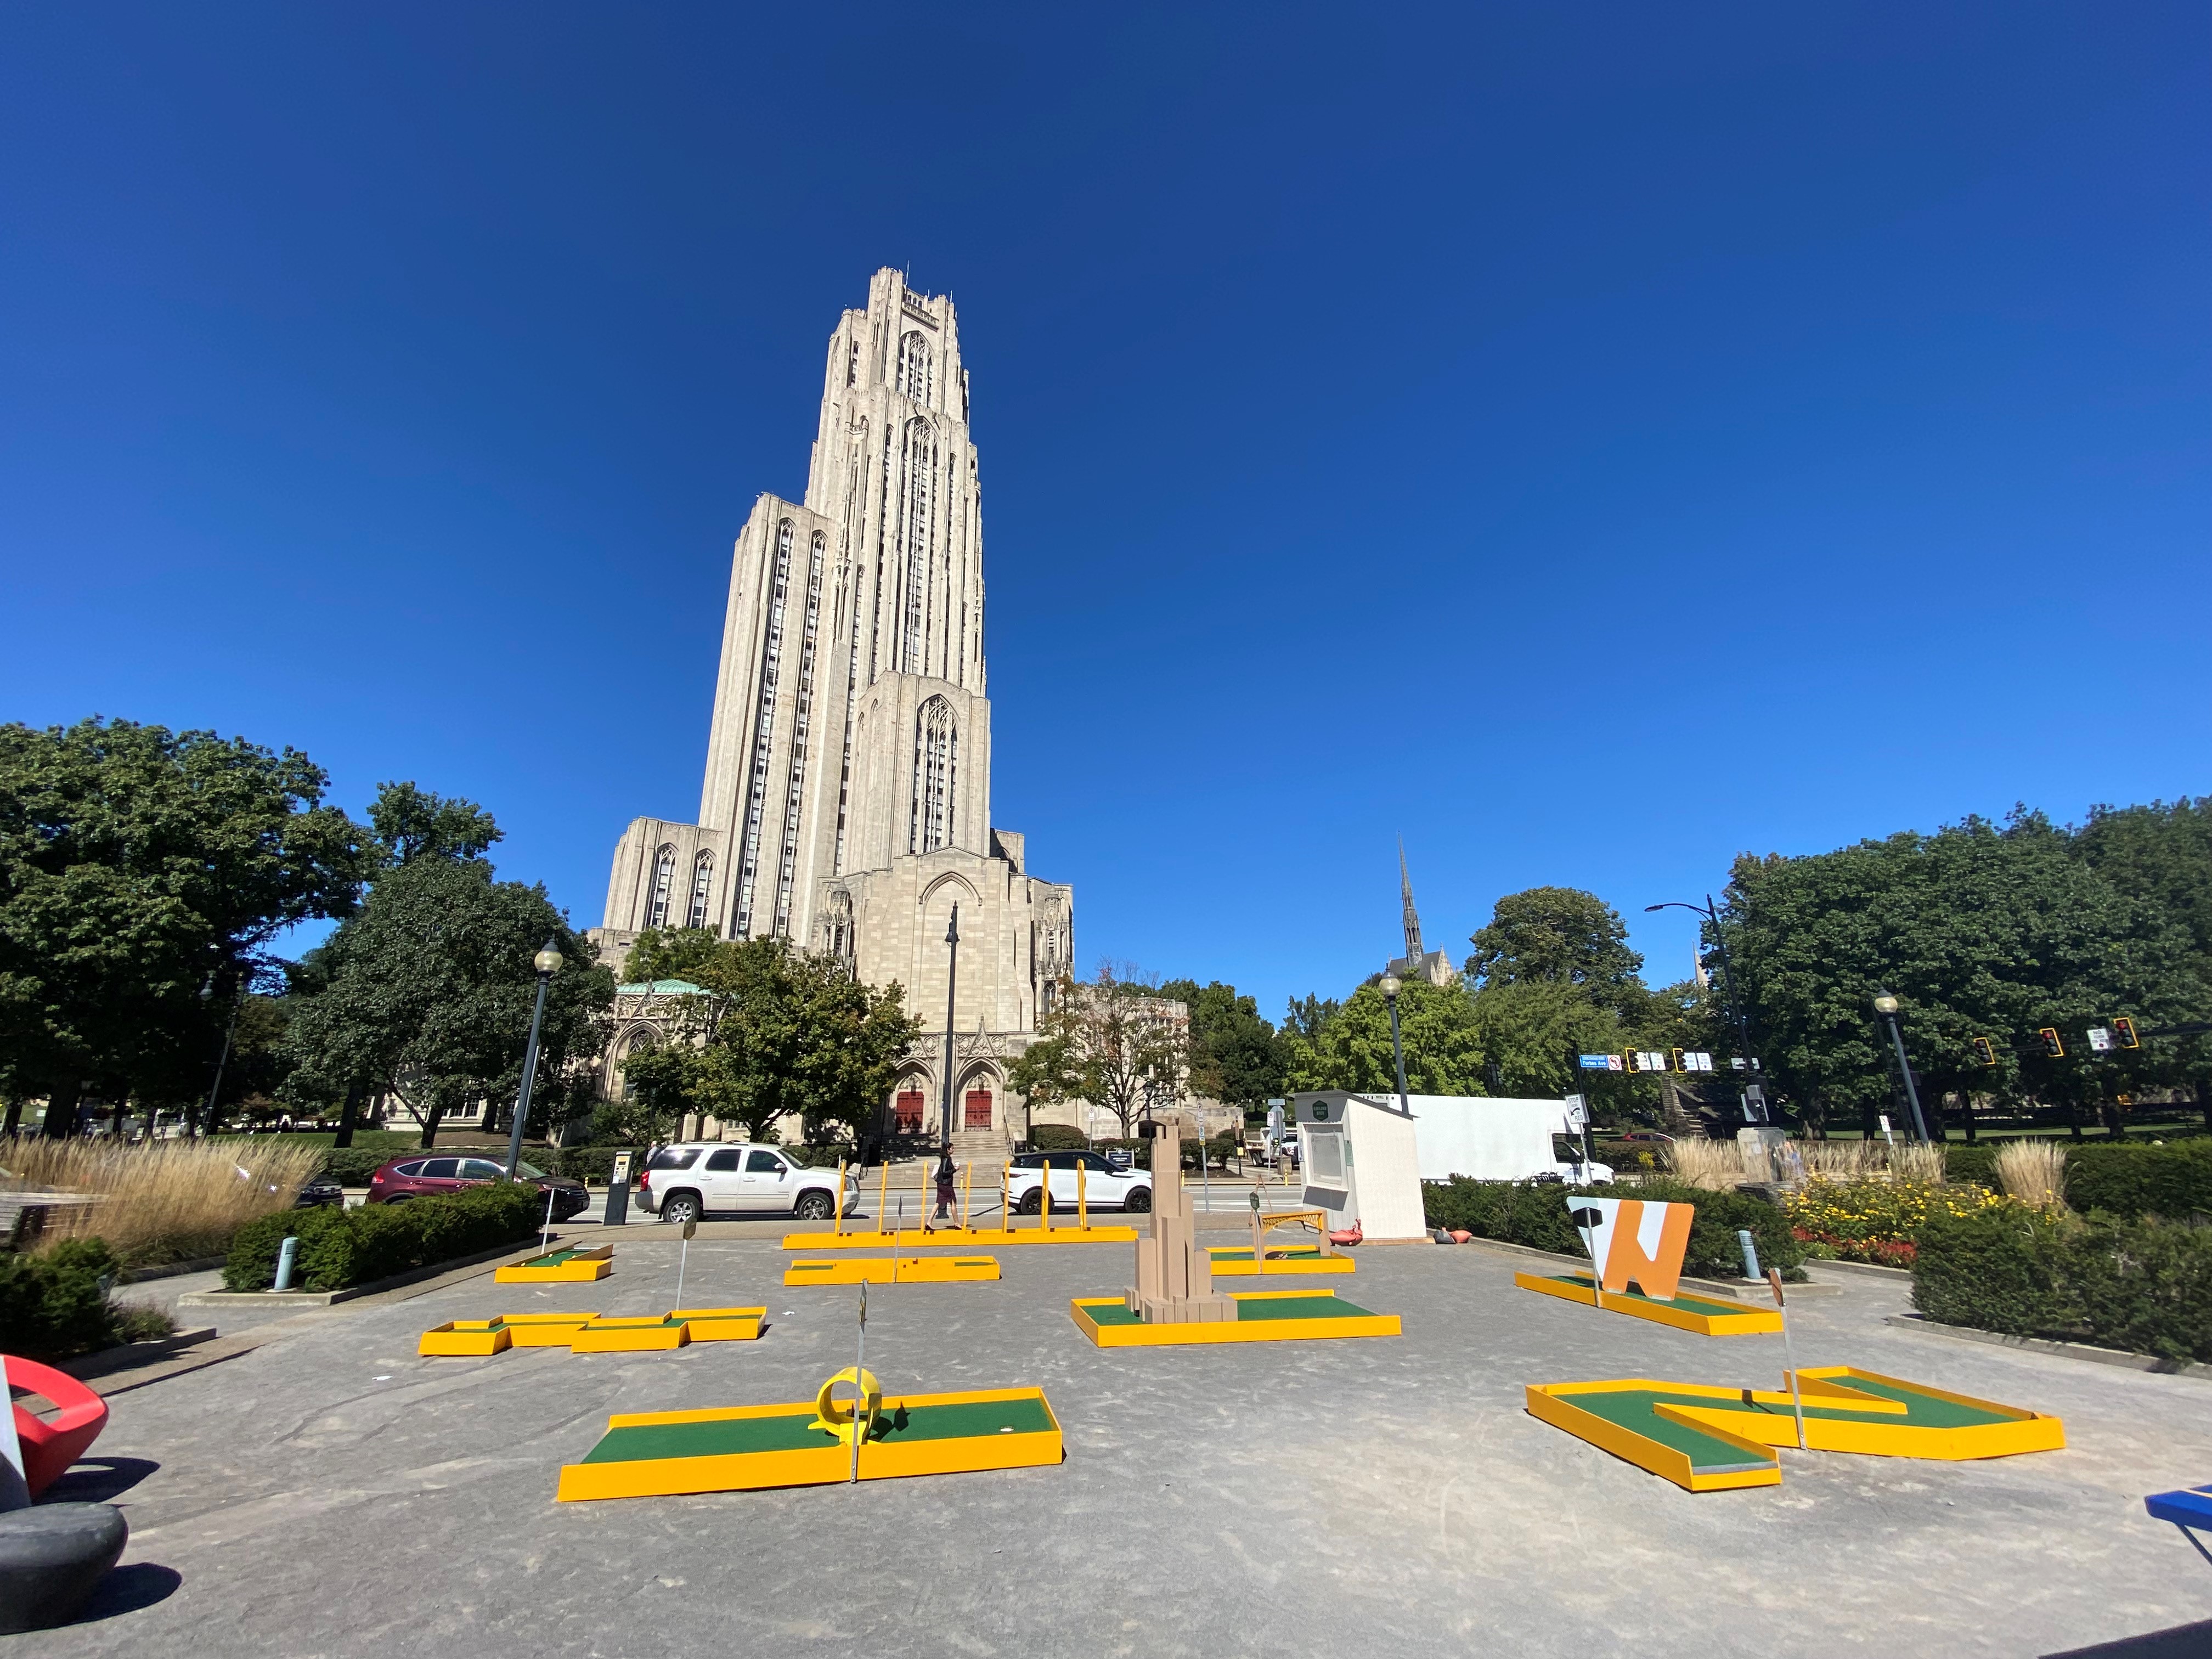 Oakland Open at Schenely Plaza